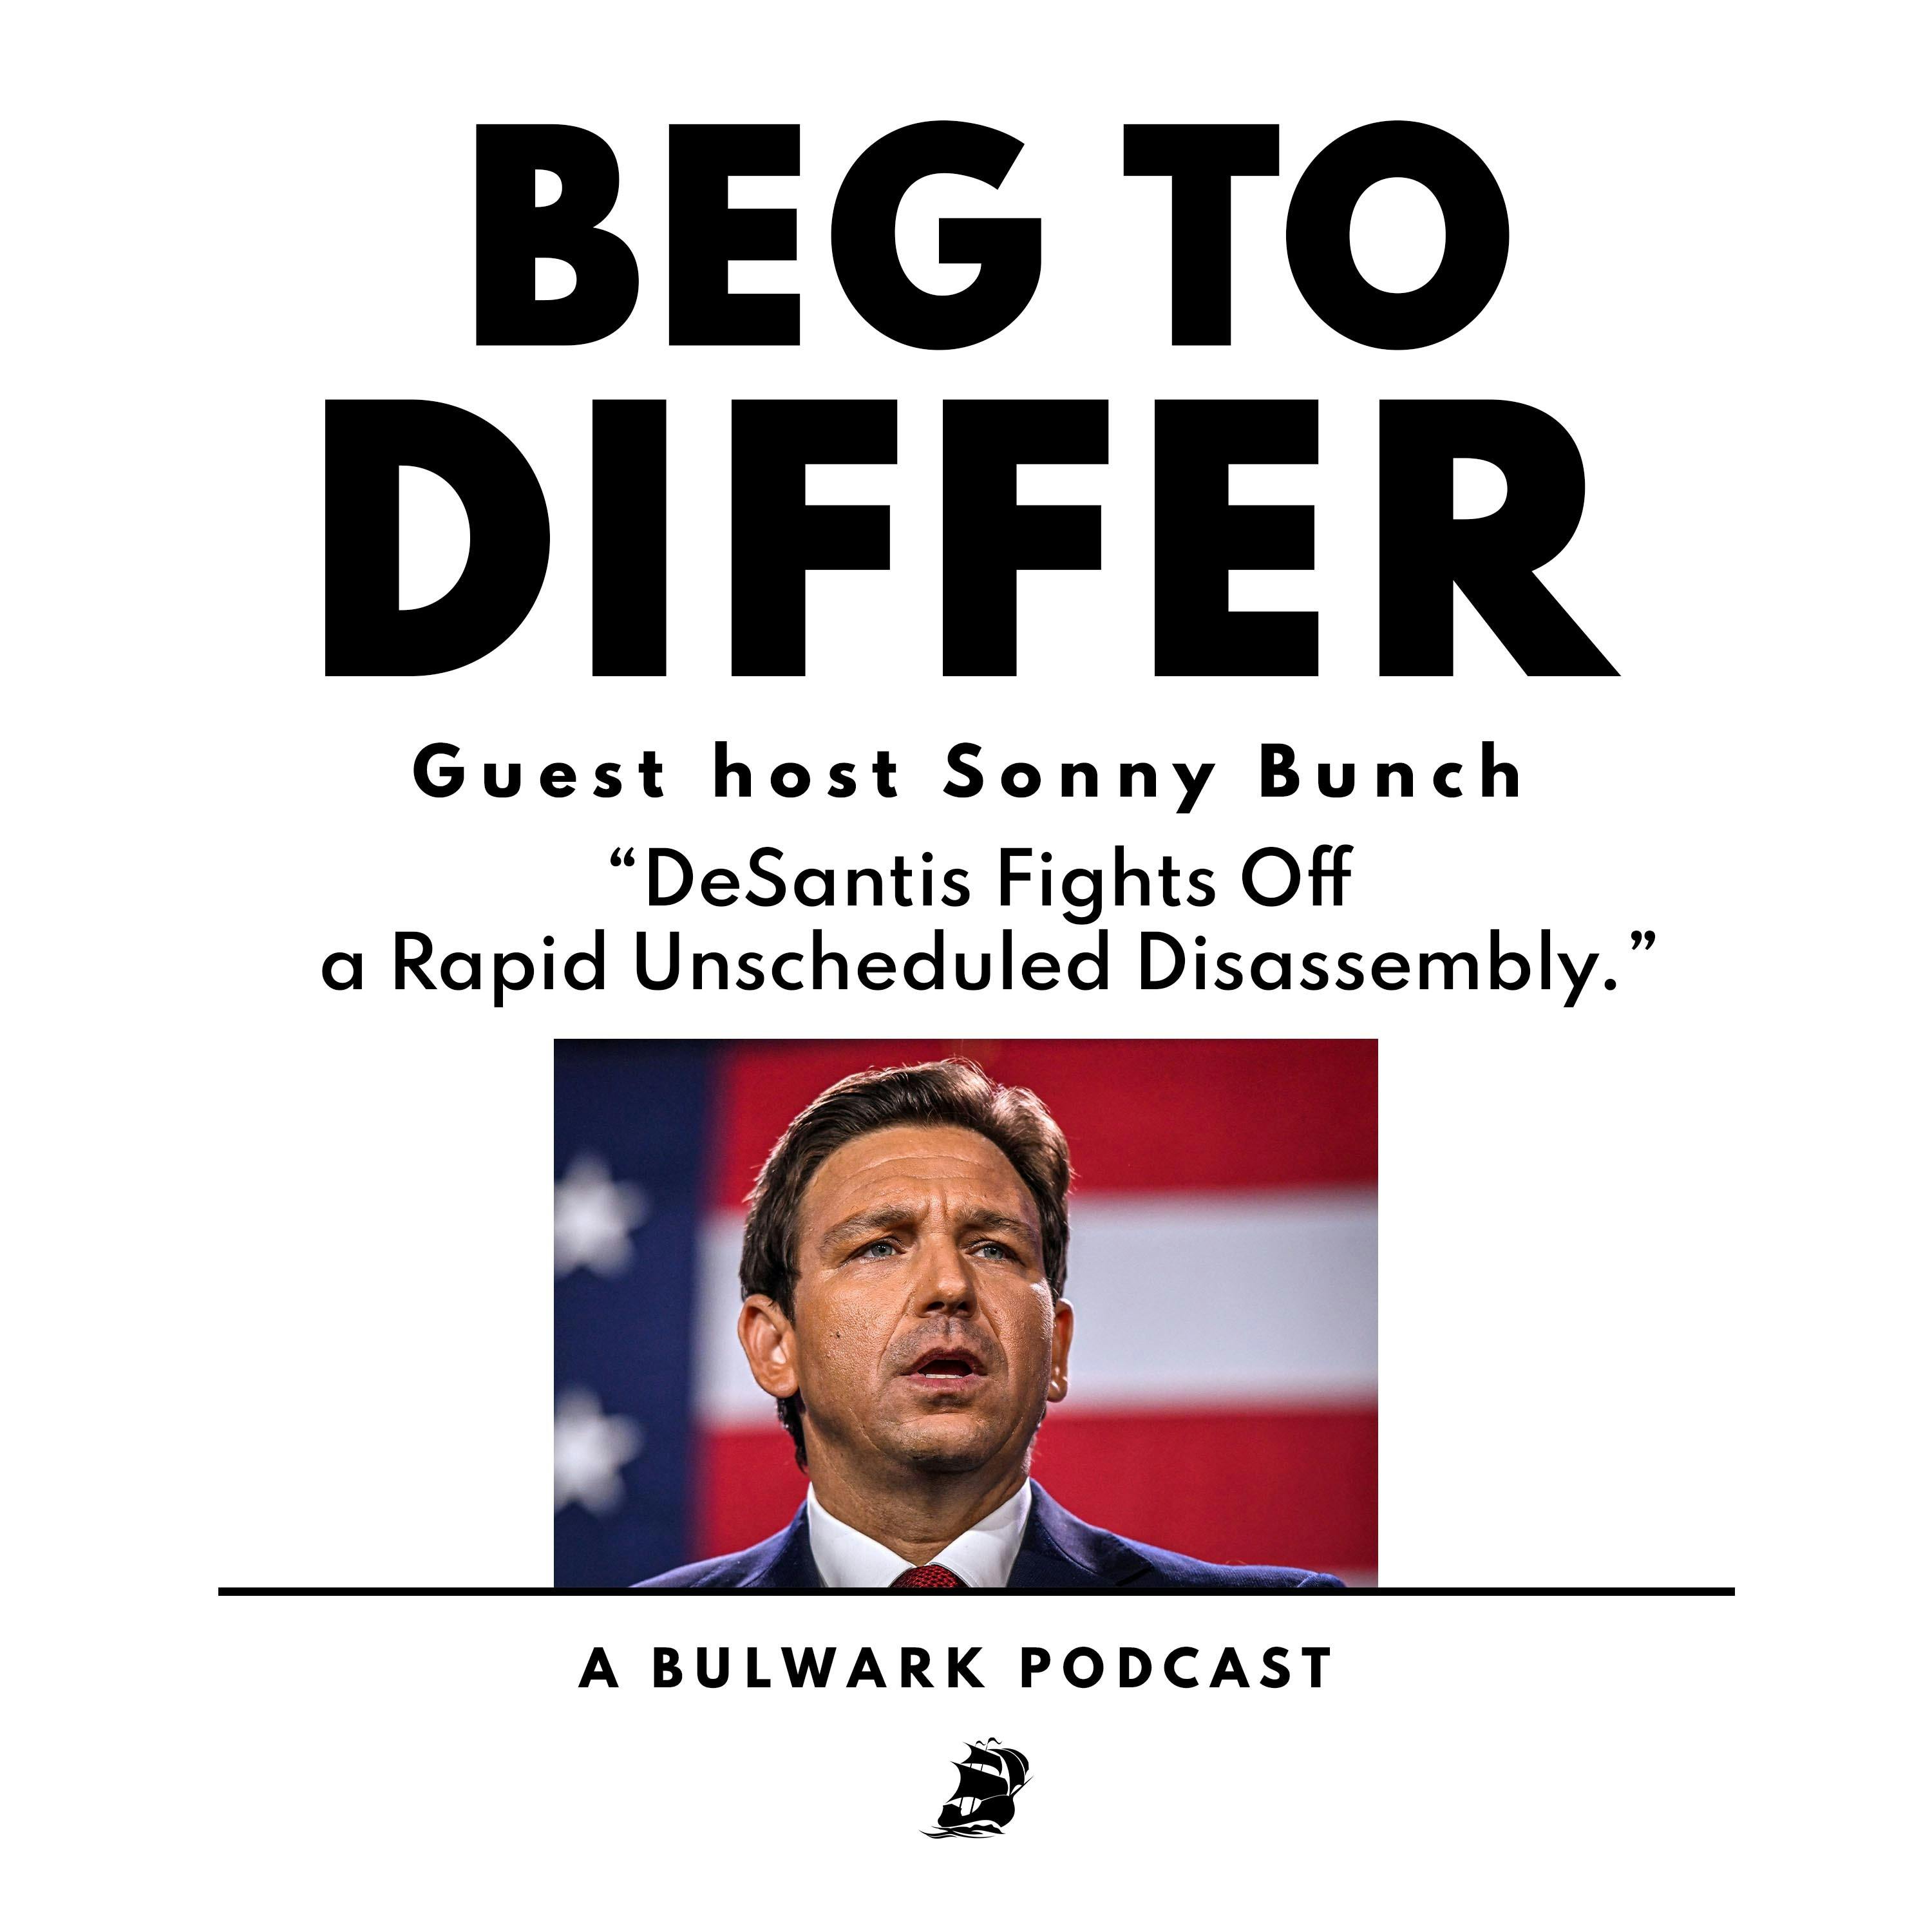 DeSantis Fights Off a Rapid Unscheduled Disassembly